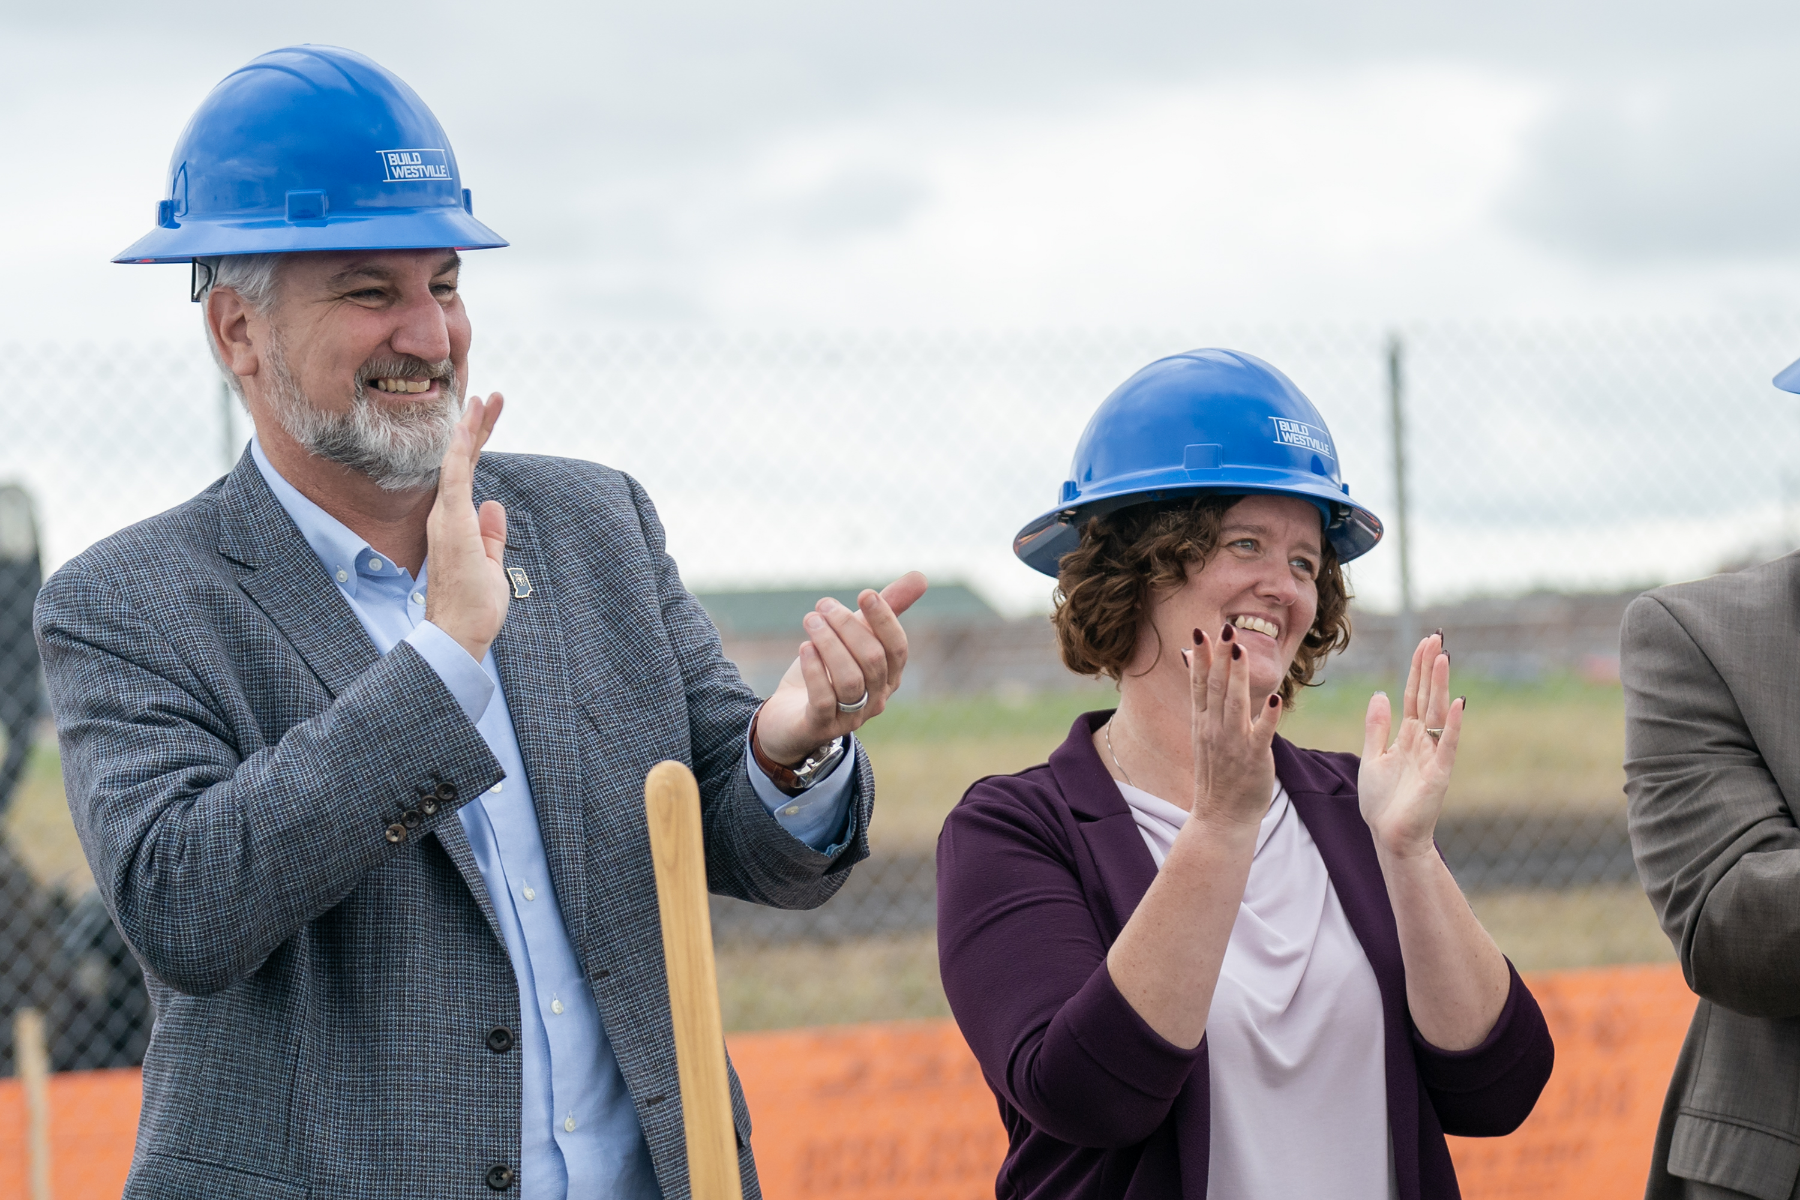 Indiana Govenor Eric Holcomb and Indiana Department of Correction Commissioner Christina Reagle share a laugh during a groundbreaking on Thursday, Sep. 28, 2023 for the new $1.2 Billion correctional facility under construction in Westville, Indiana.